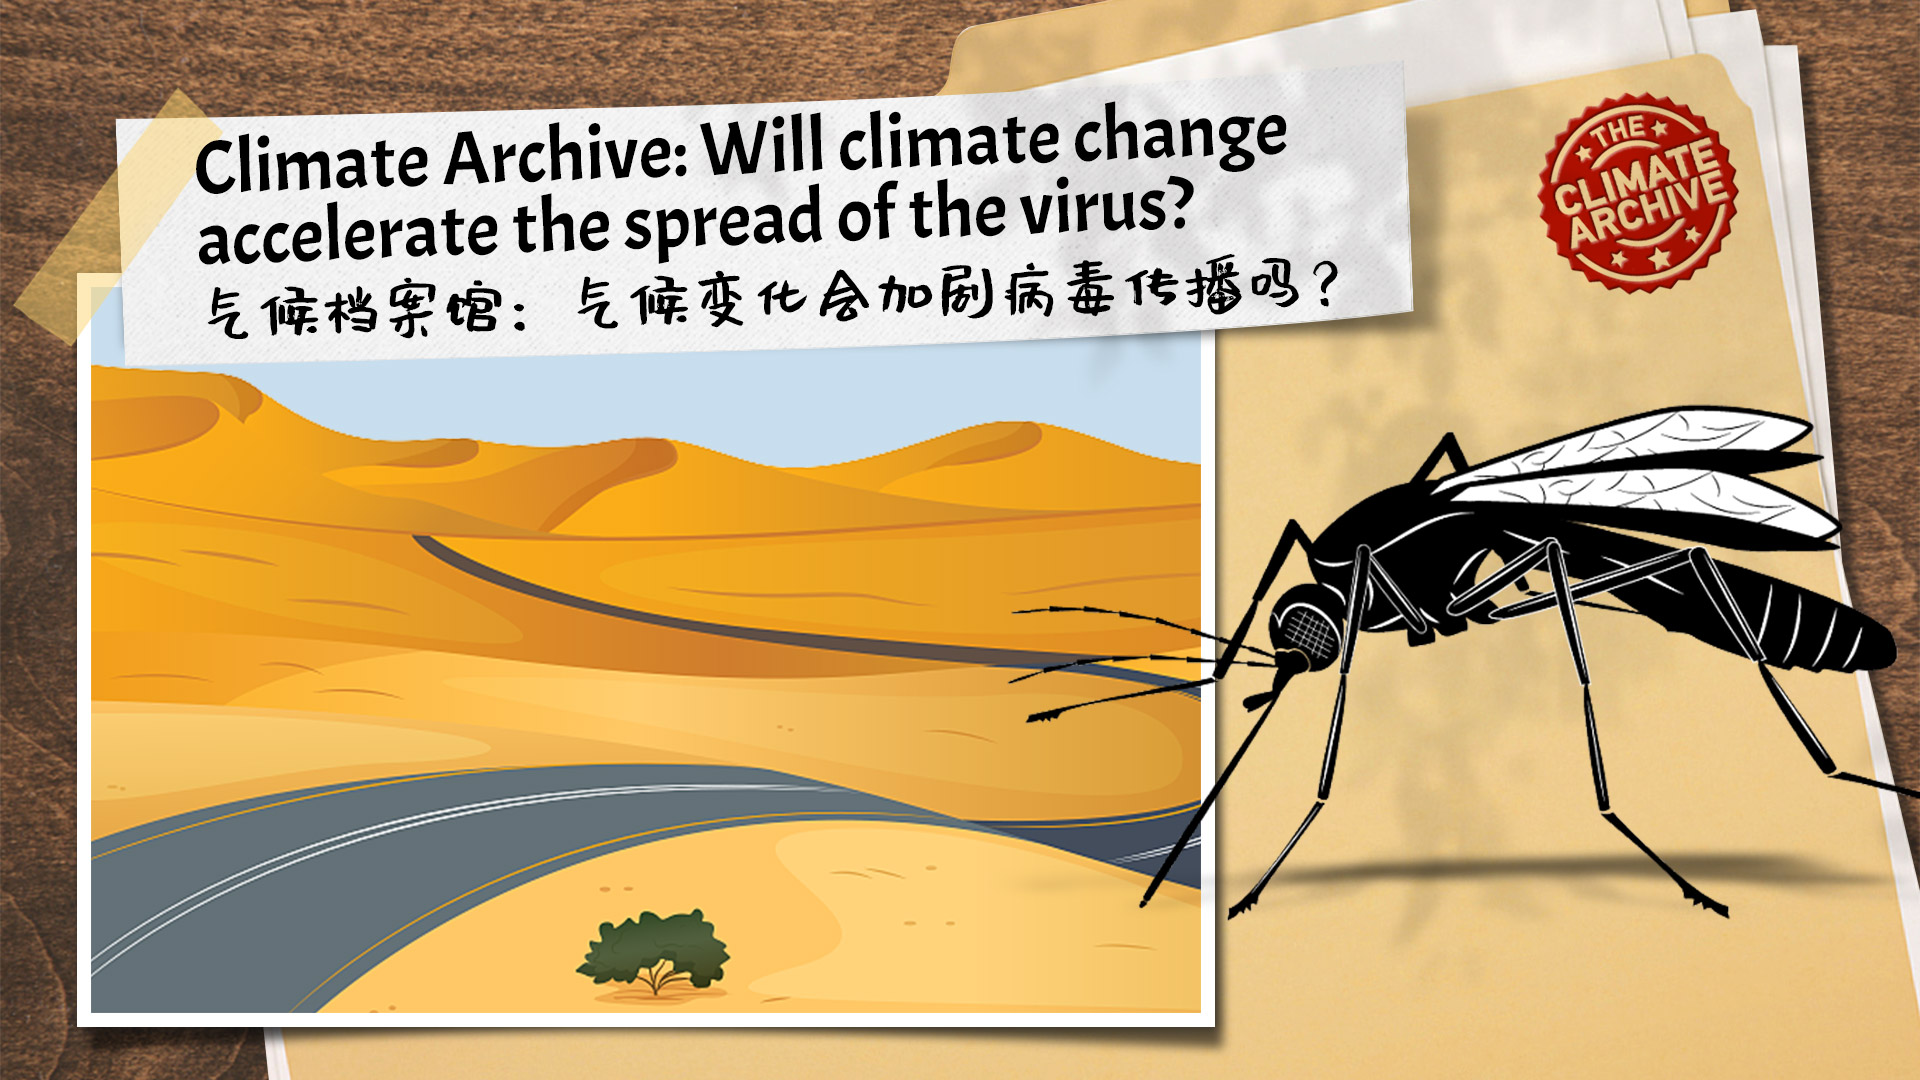 Climate Archive: Will climate change accelerate the spread of the virus?